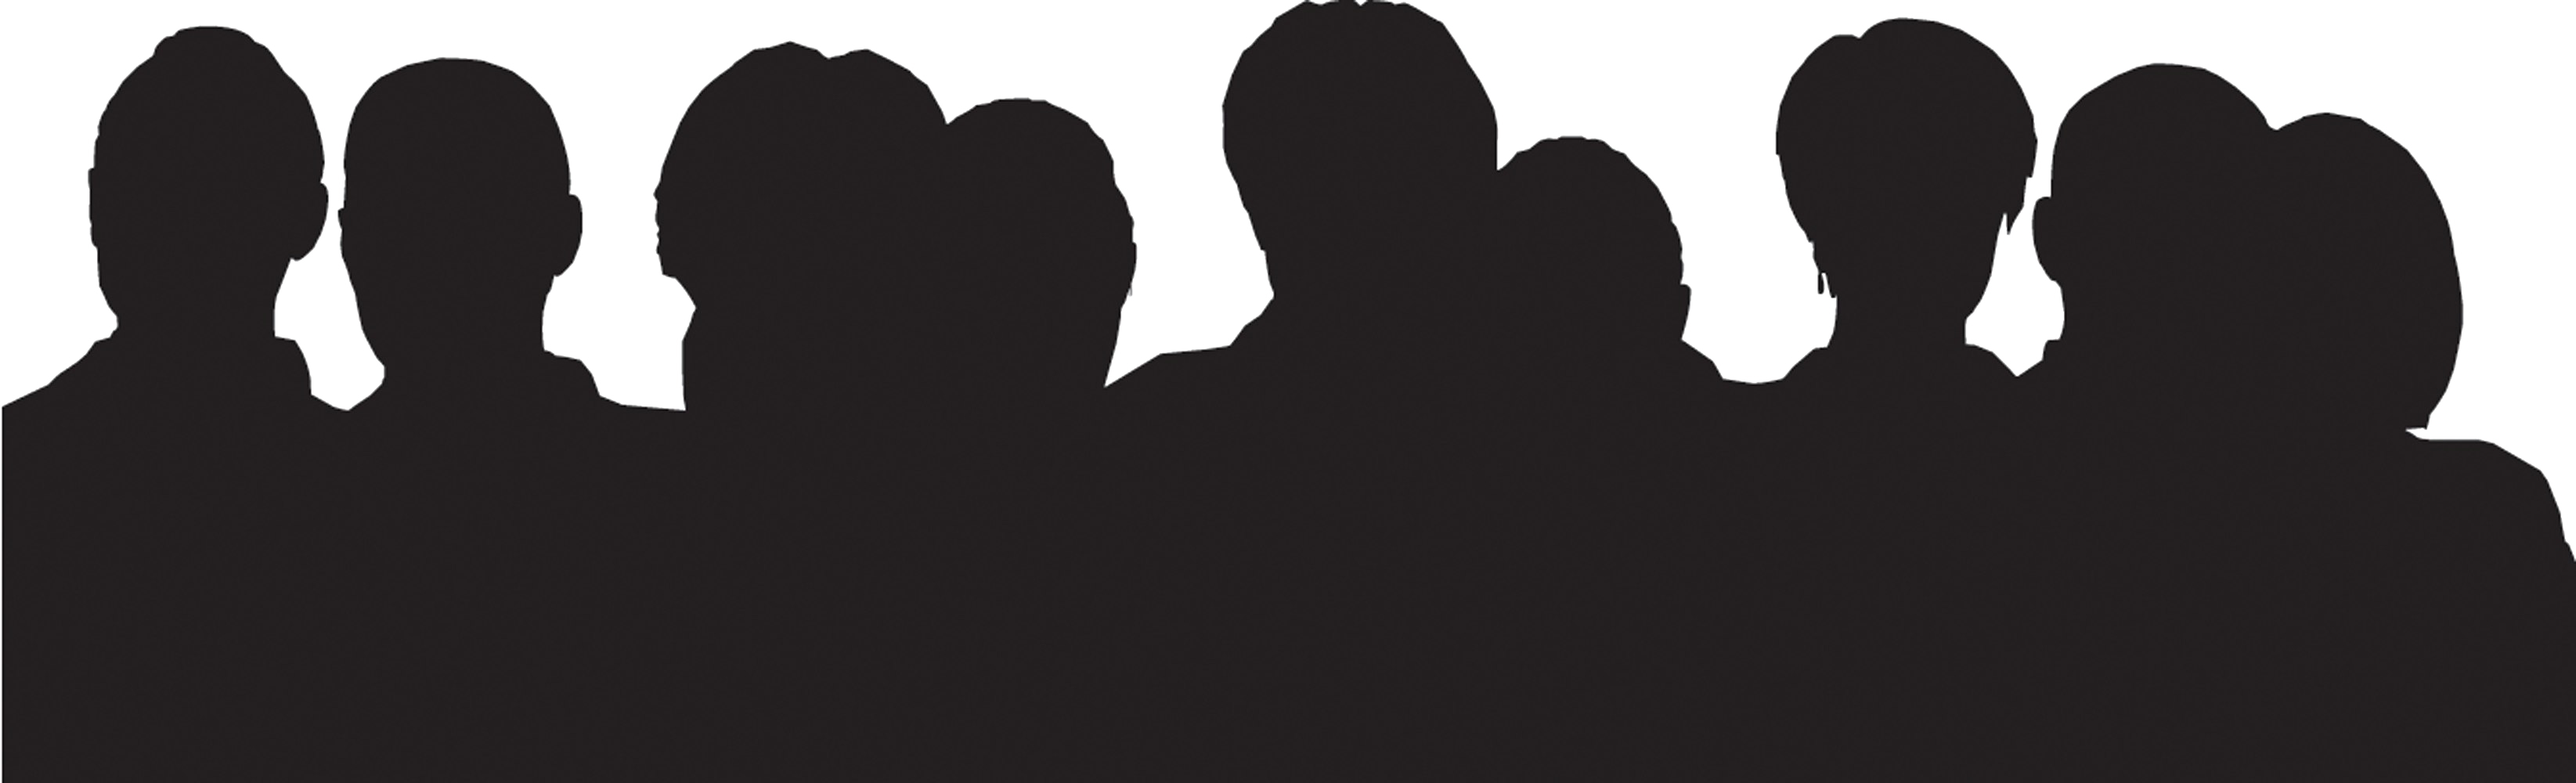 Crowd Silhouette PNG Pic